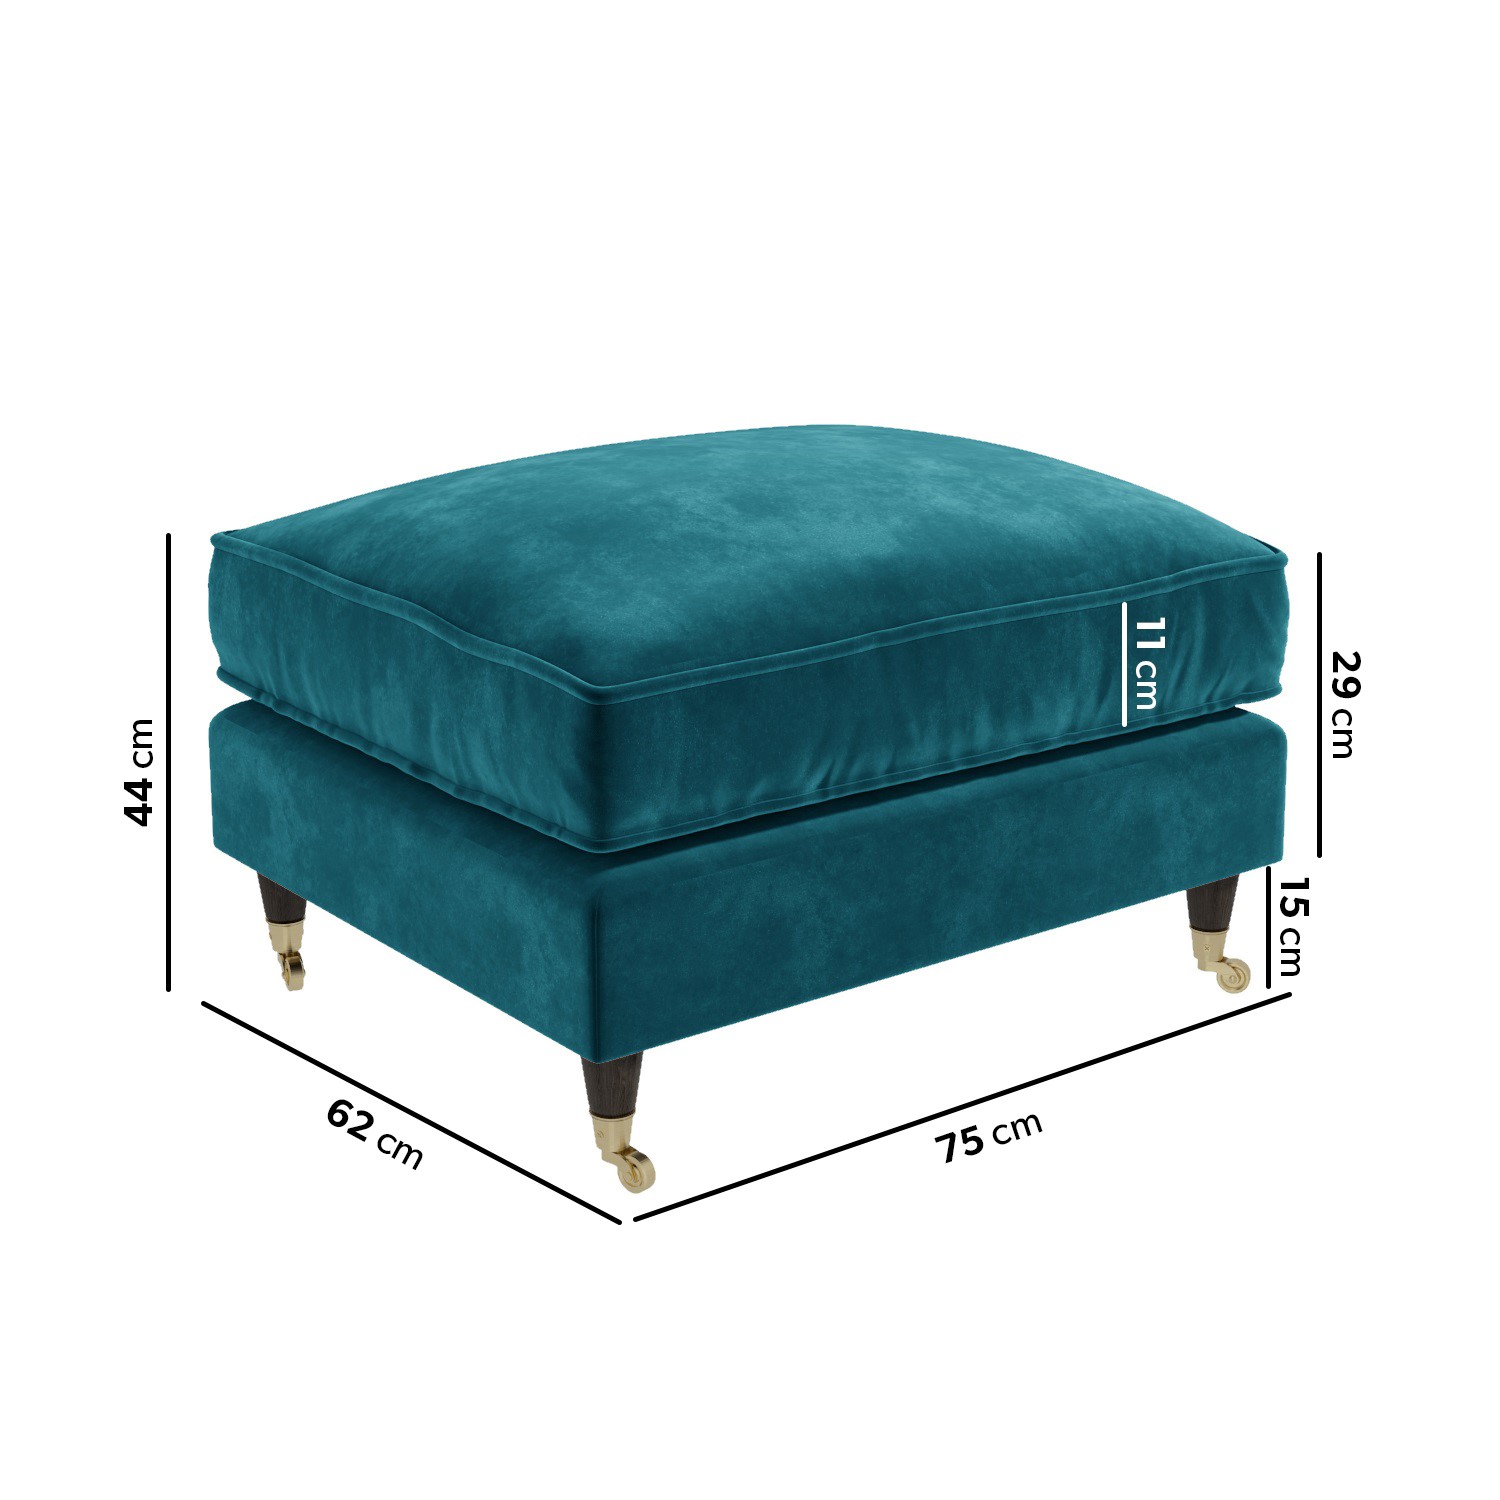 Read more about Teal velvet footstool payton